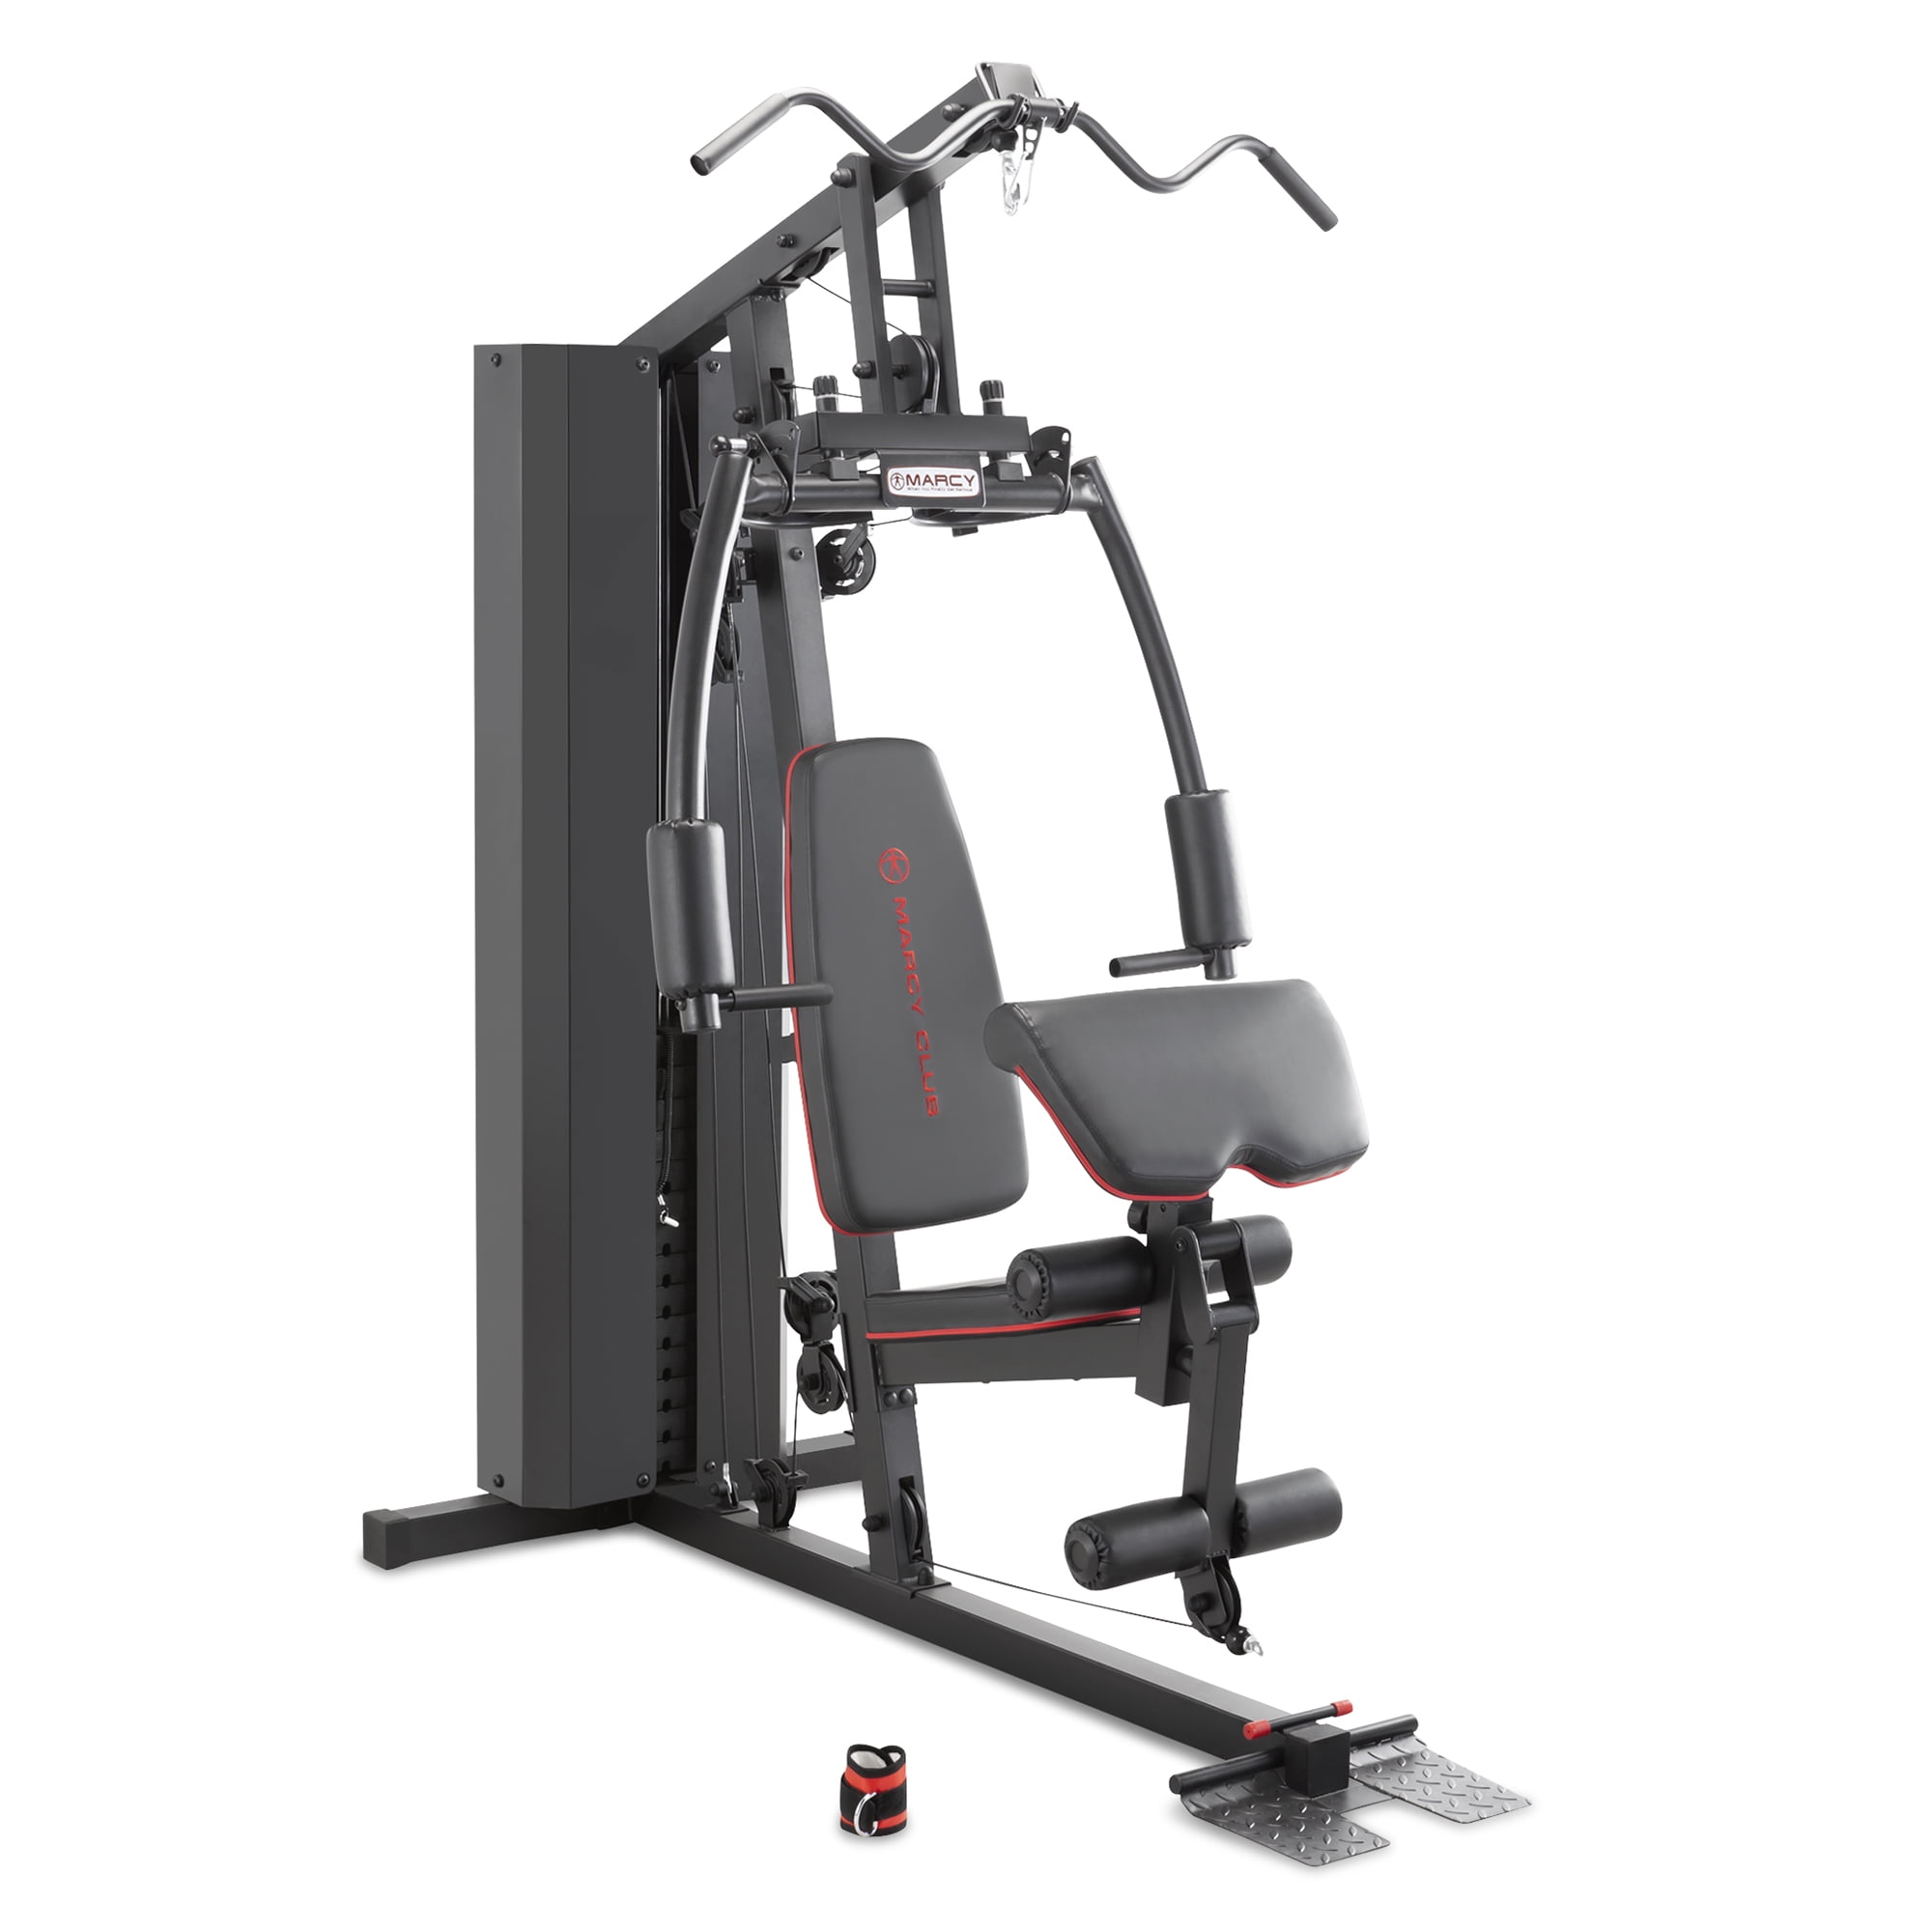 Inspire Fitness CG3 Home Gym Functional Trainer 